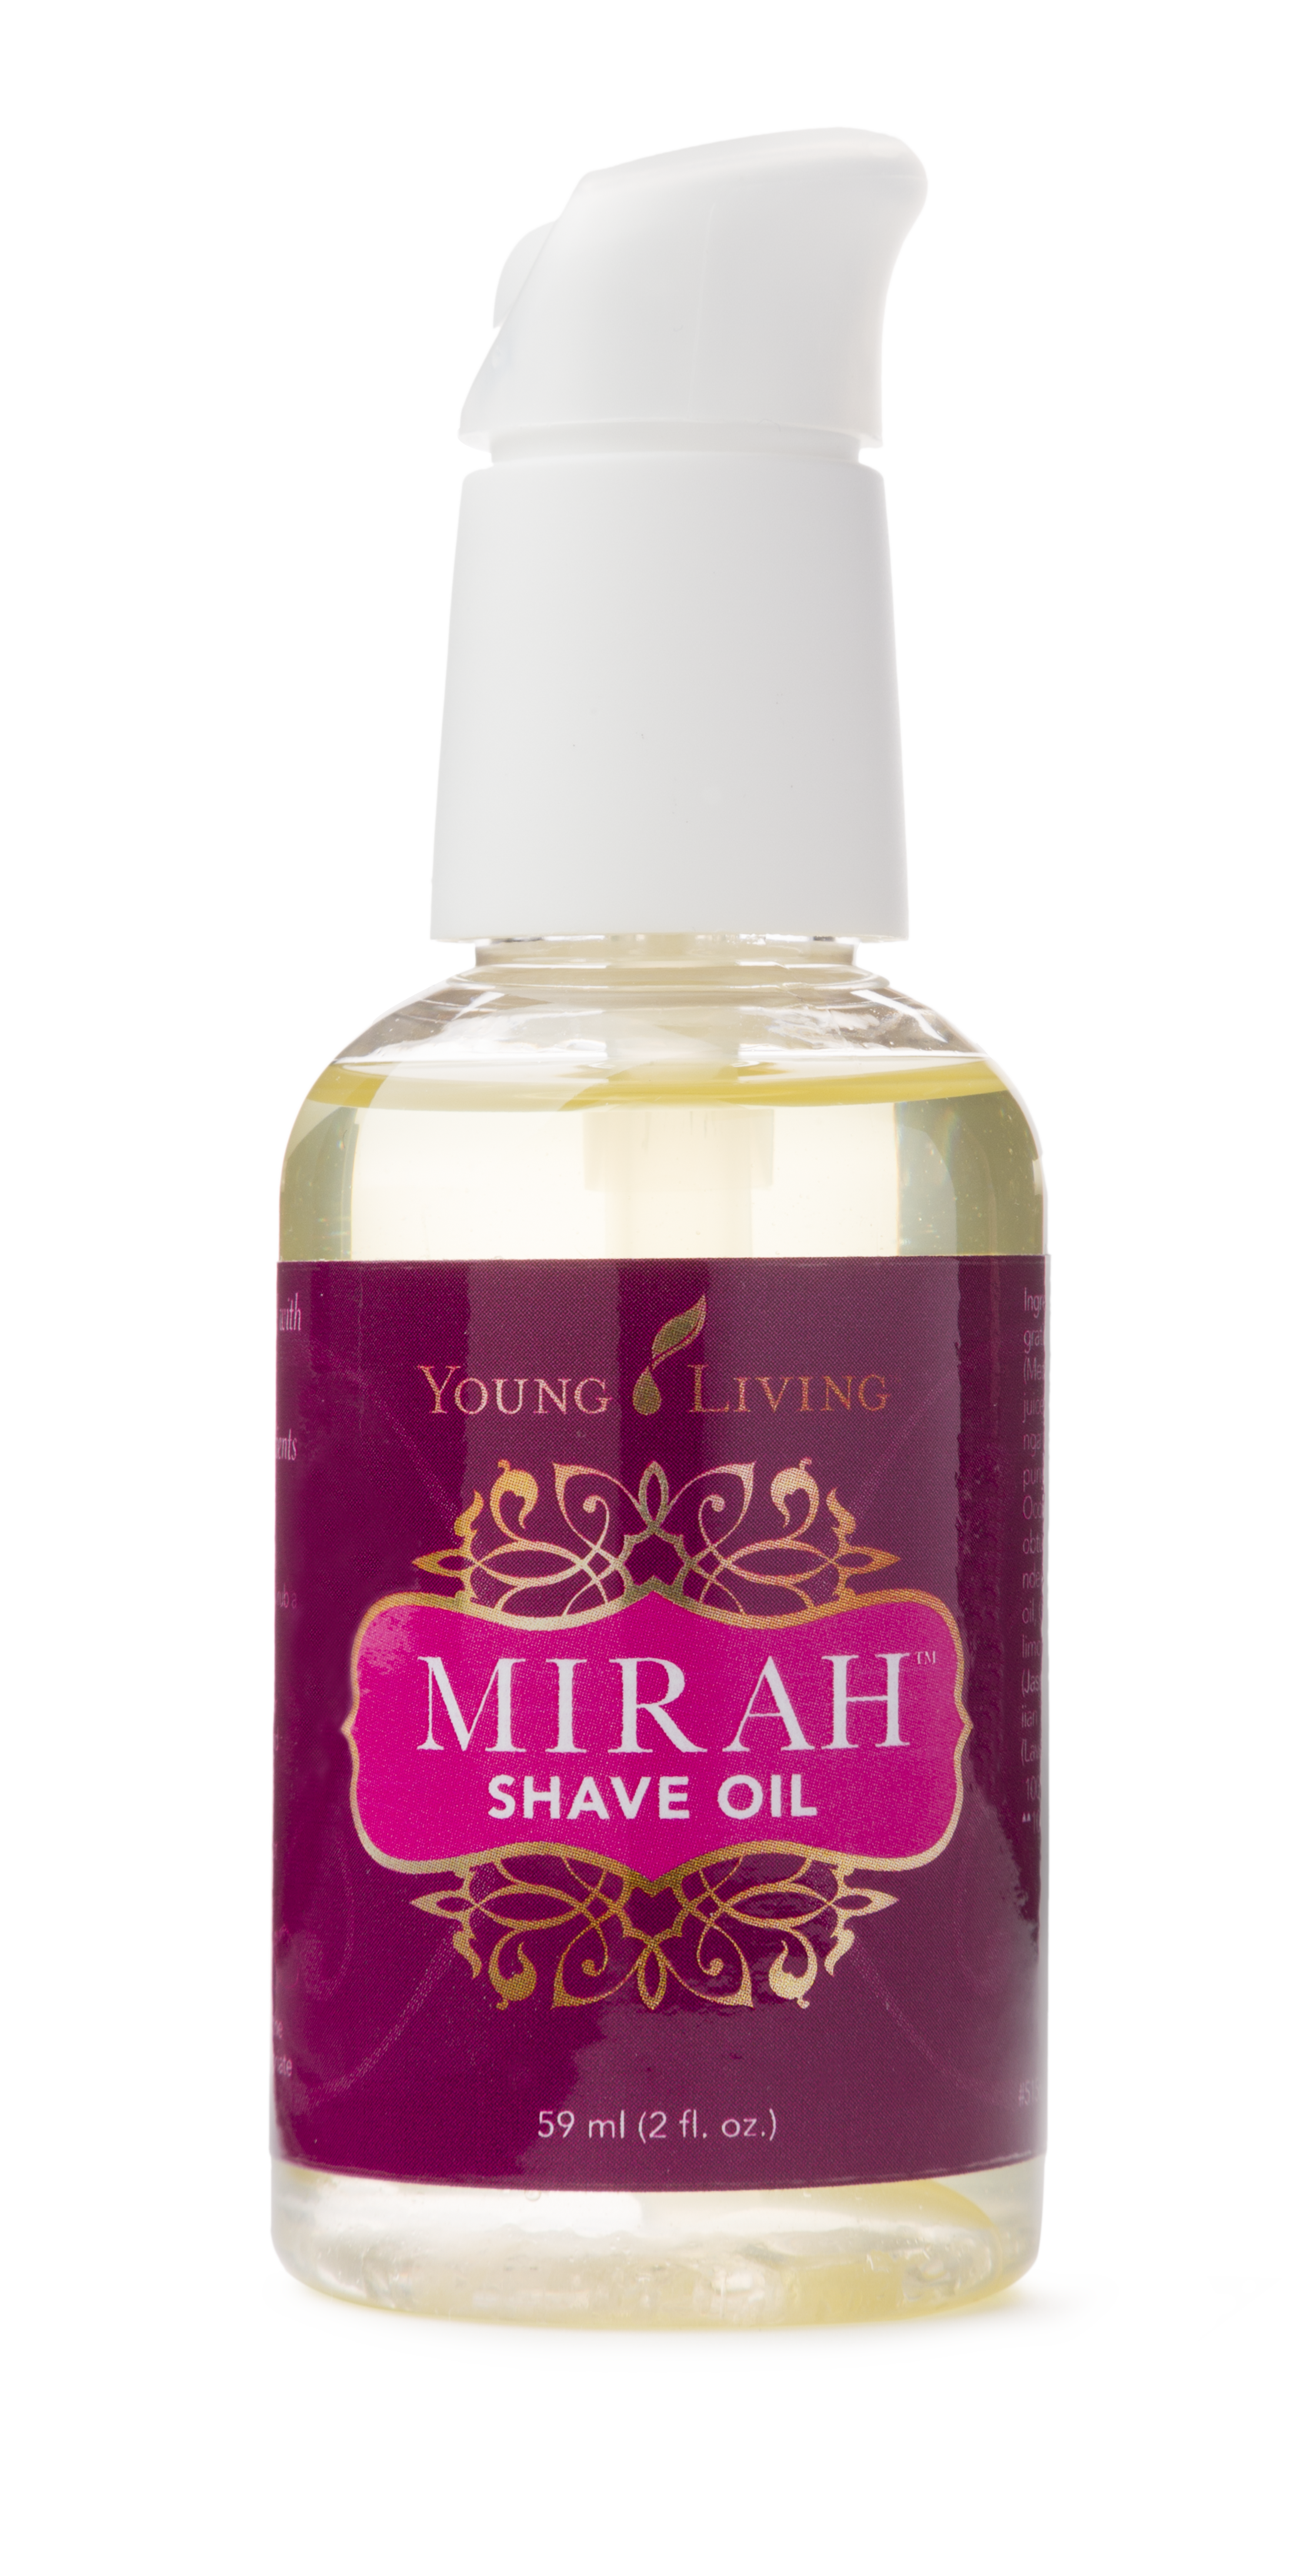 Mirah Shave Oil Silo.png